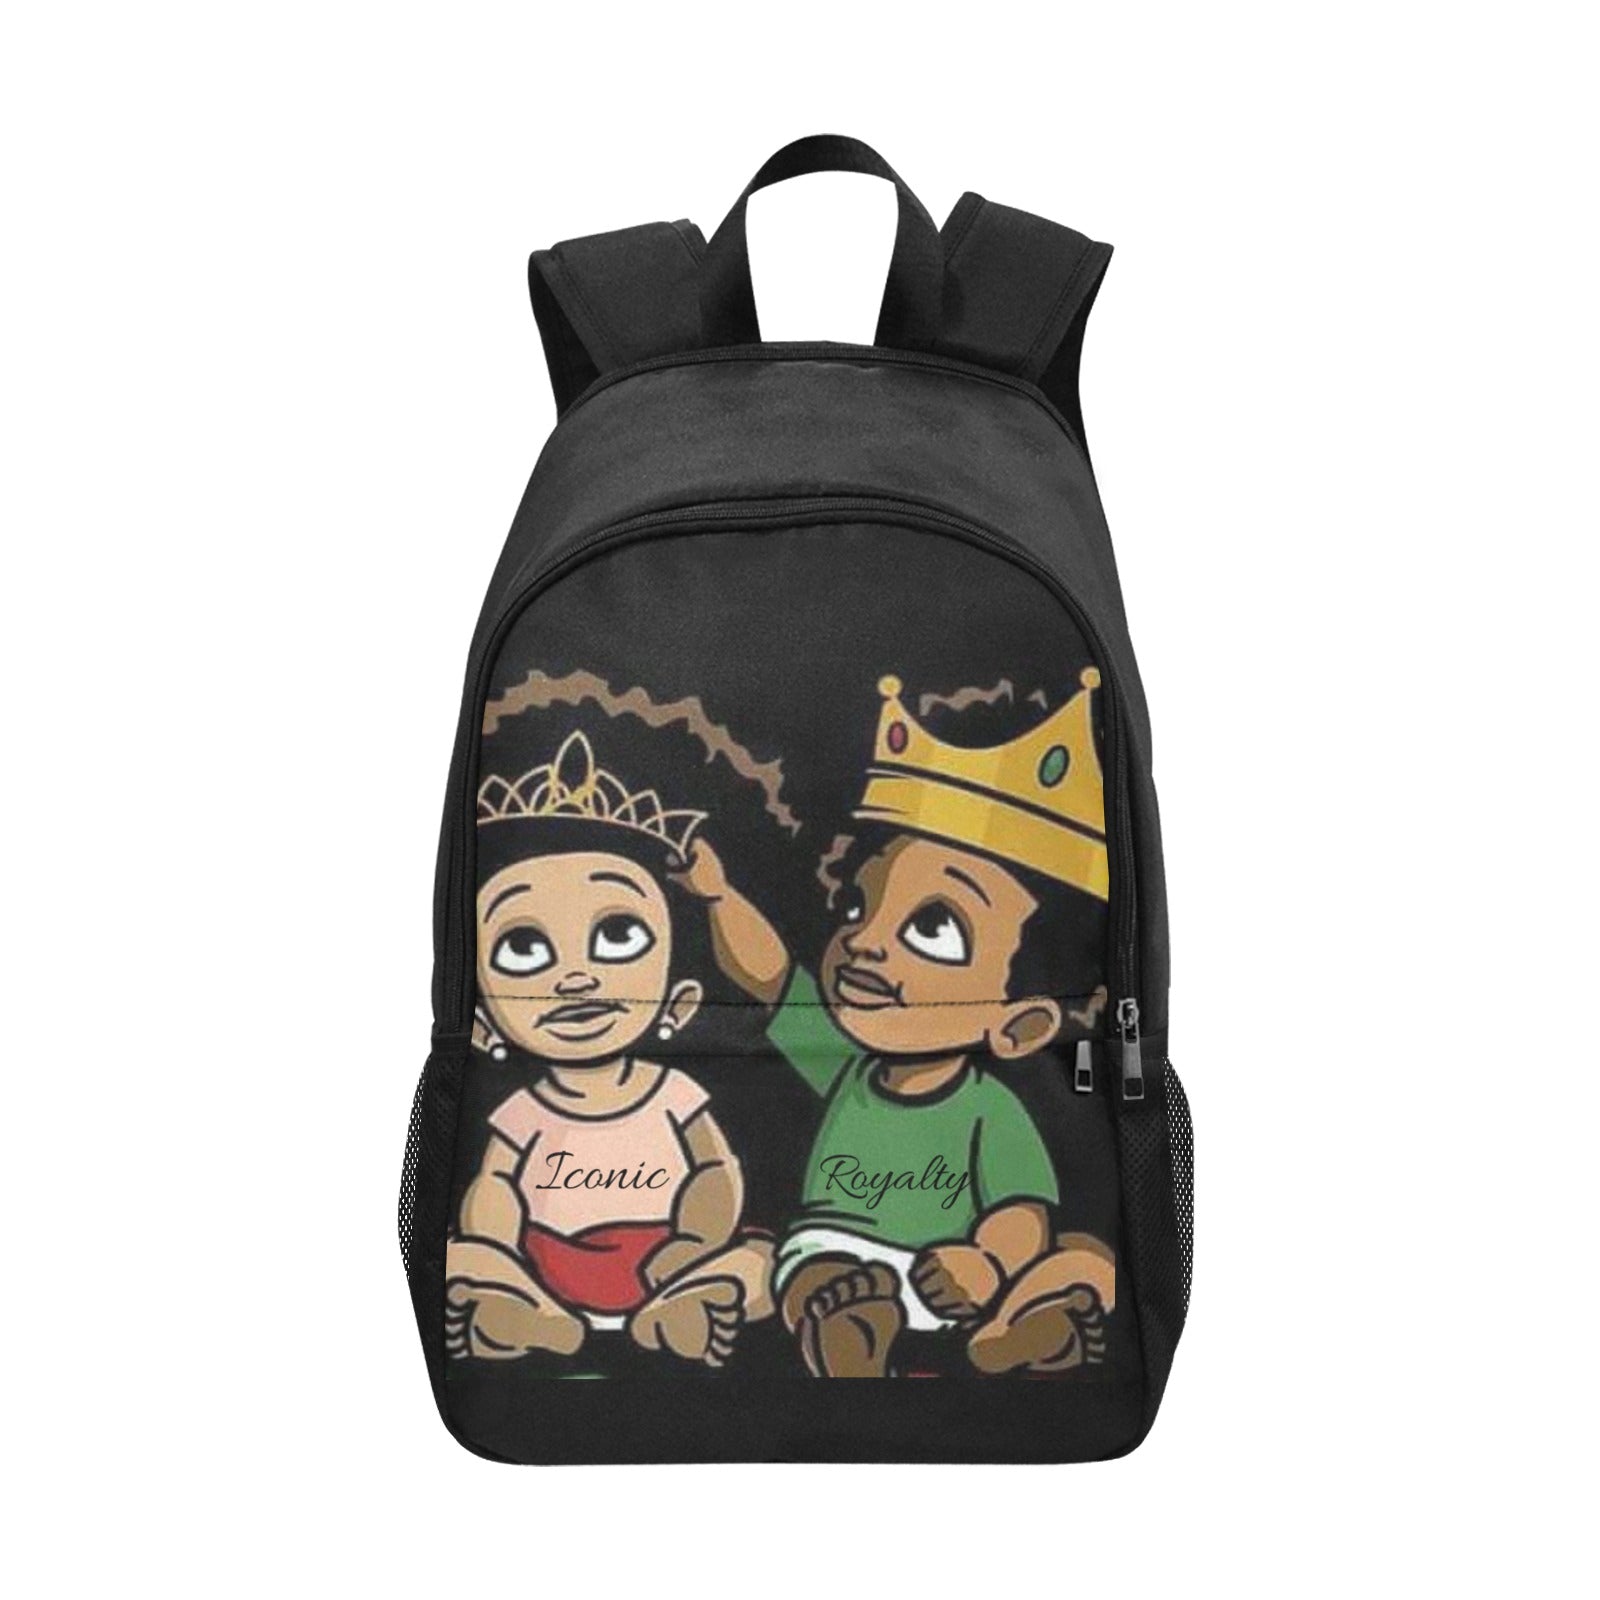 Fix My Crown Fabric Backpack with Side Mesh Pockets